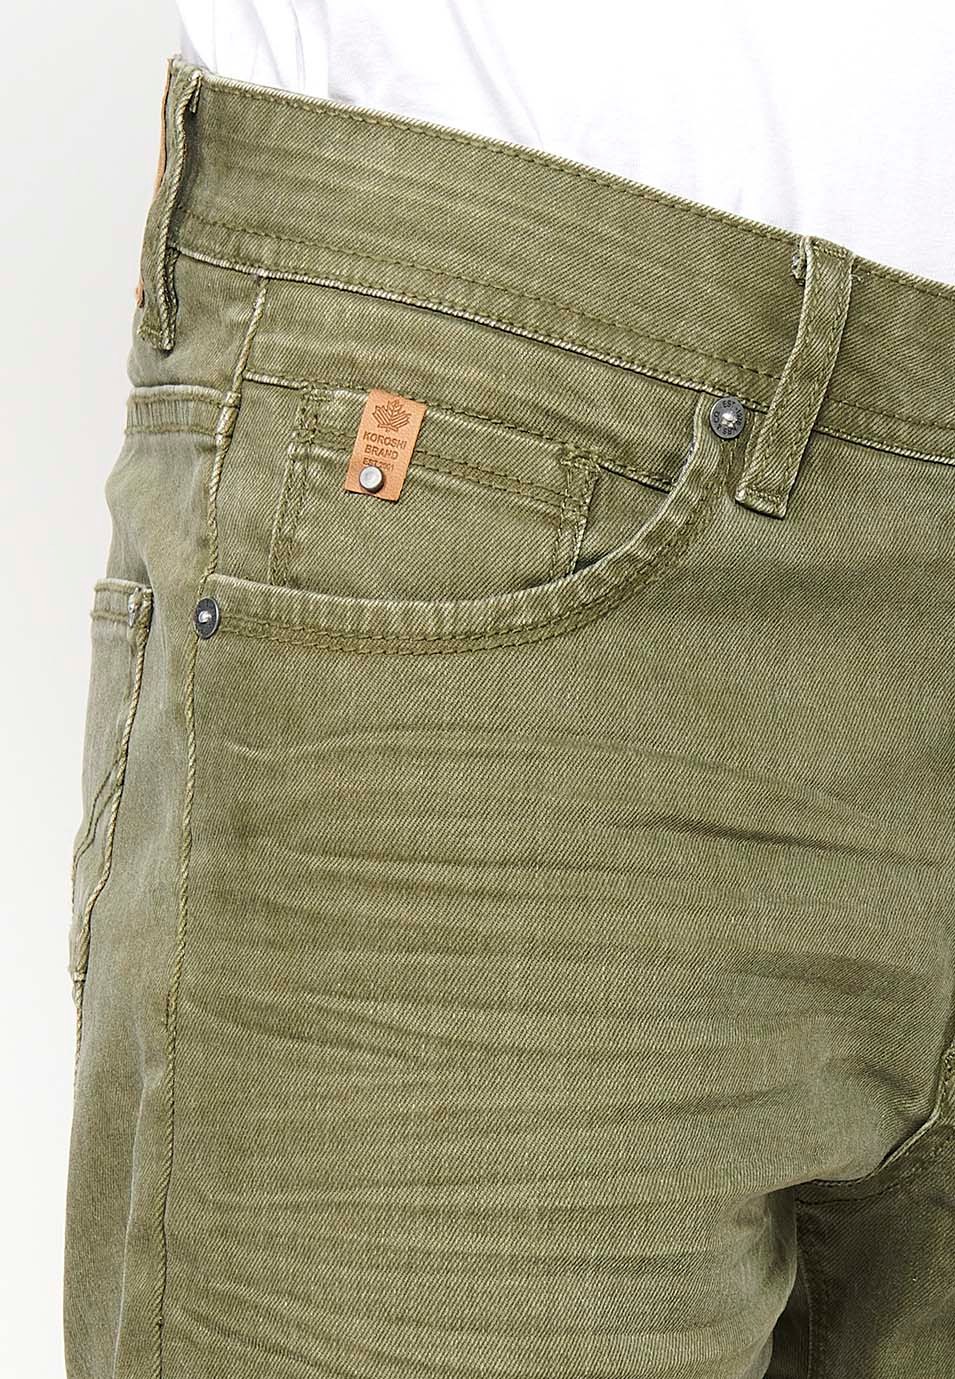 Denim Bermuda shorts with turn-up finish, front closure with zipper and button with five pockets, one pocket pocket, Olive Color for Men 8